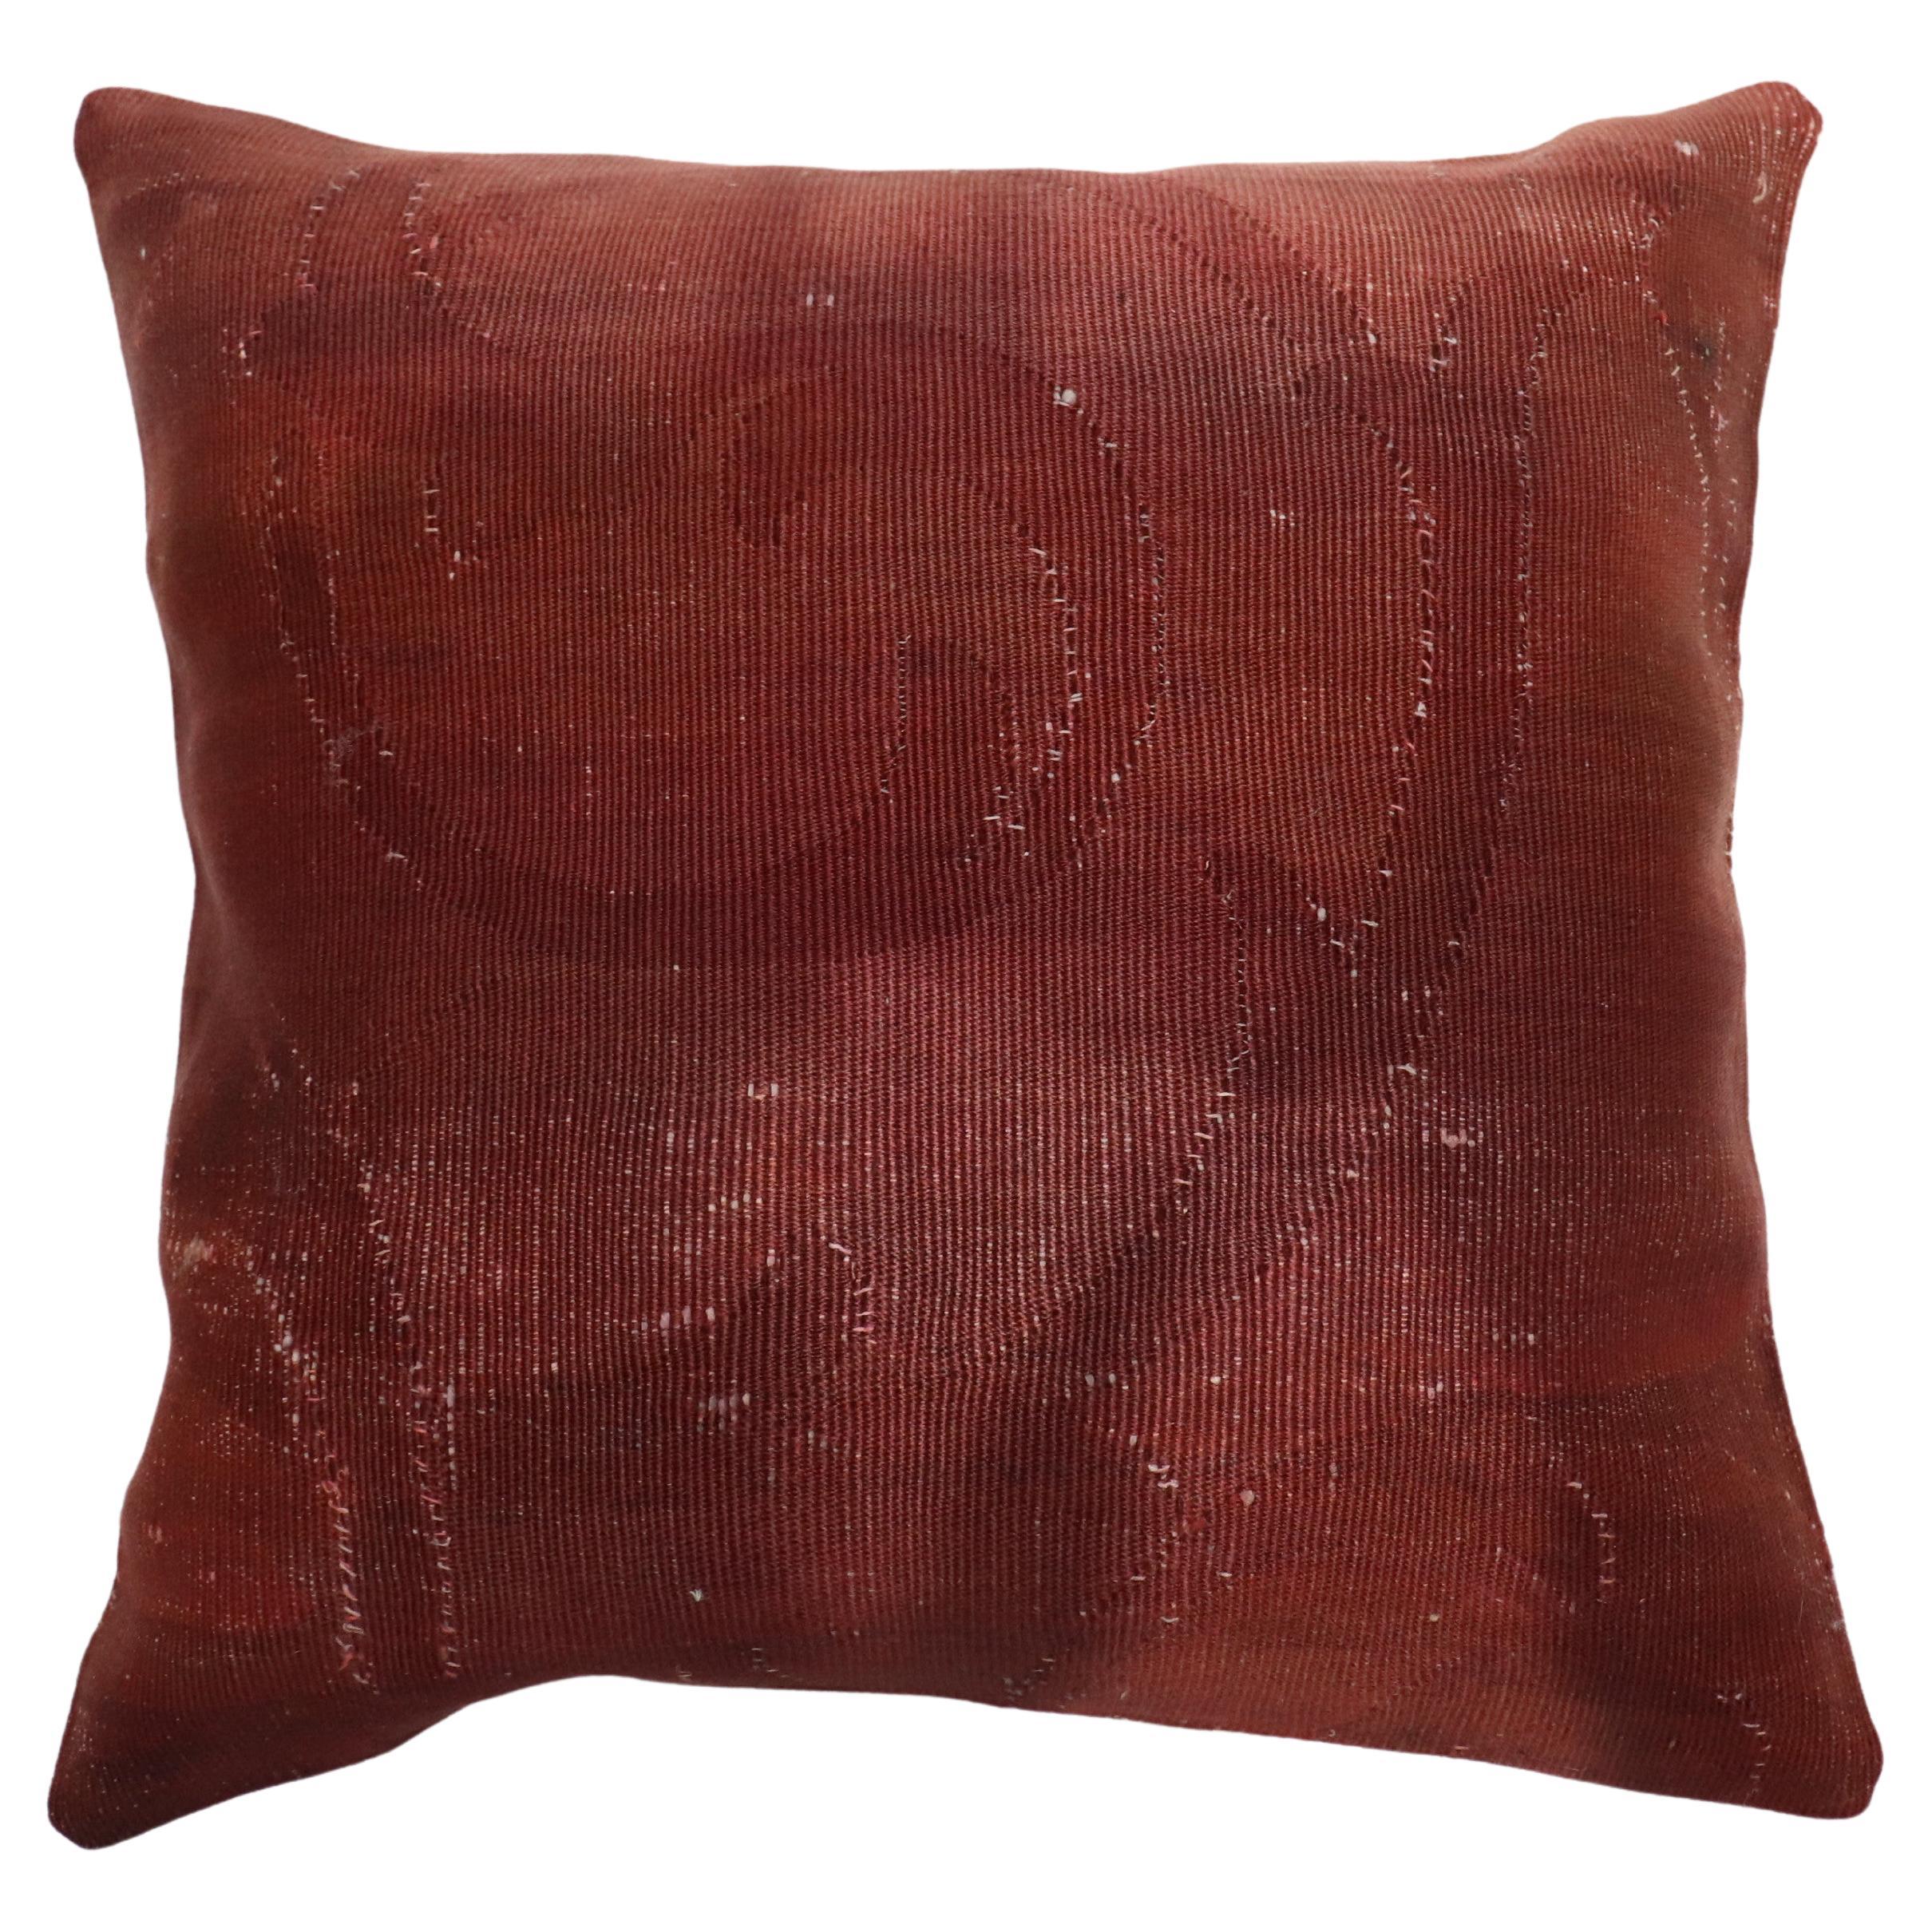 Authentic stand-alone pillow made from a 19th century French Aubusson rug

Measures: 16